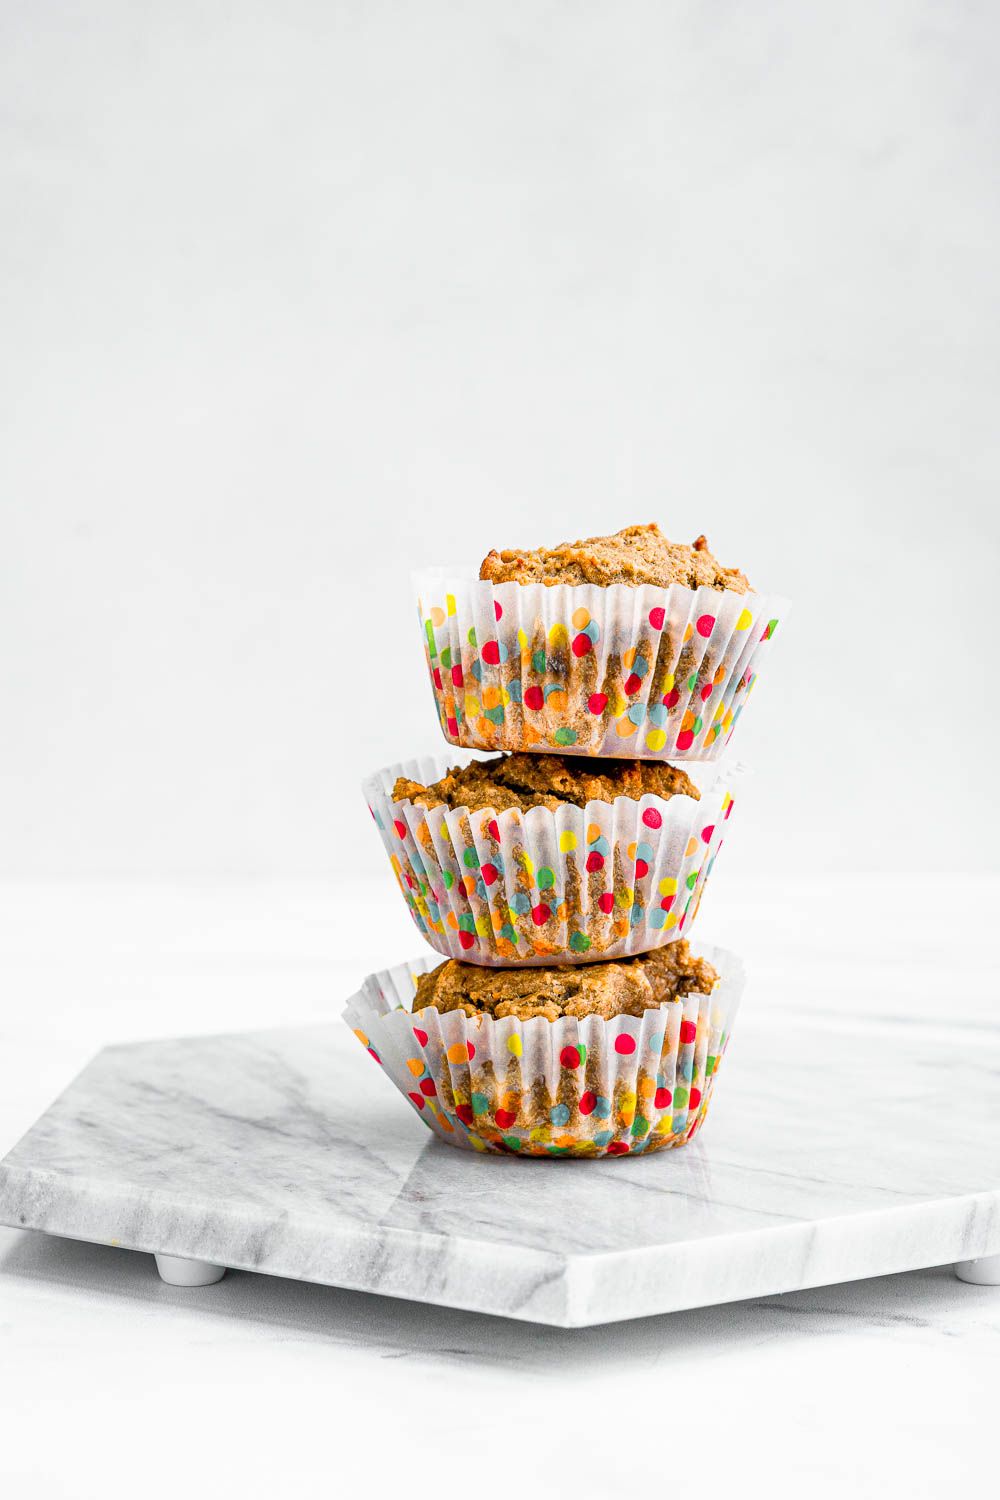 Low Carb Peanut Butter Banana Flour Muffins